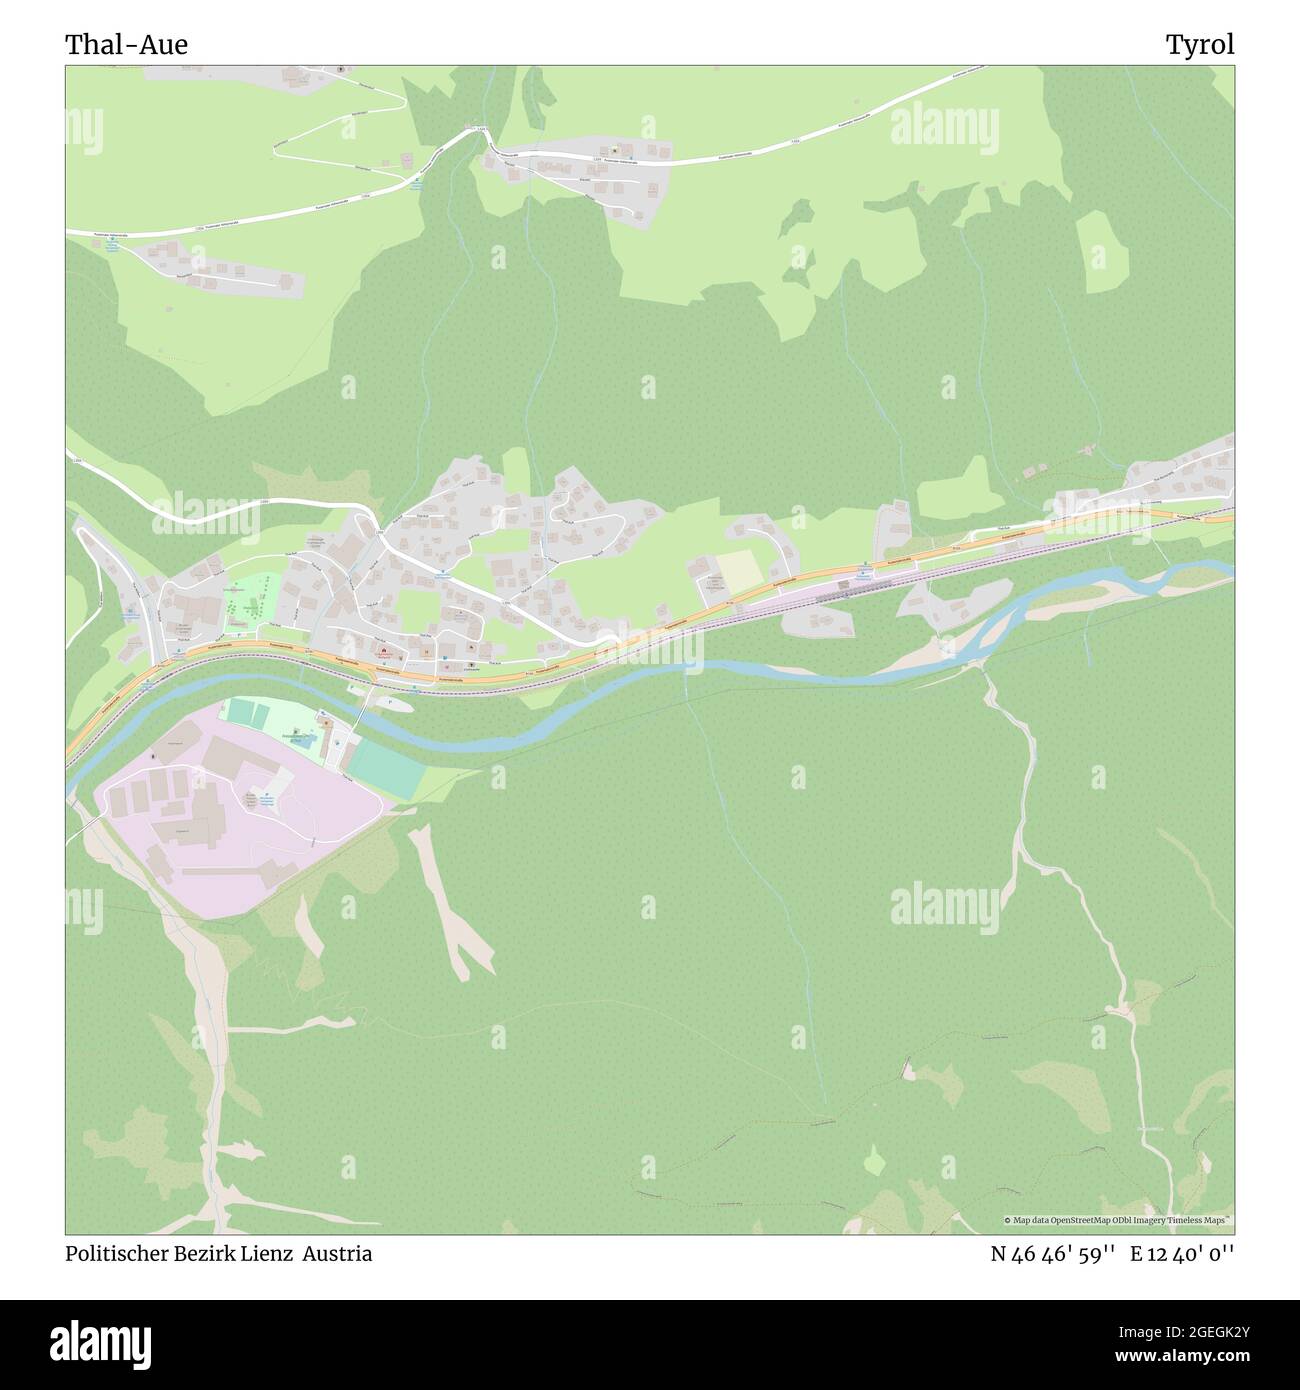 Thal-Aue, Politischer Bezirk Lienz, Austria, Tyrol, N 46 46' 59'', E 12 40' 0'', map, Timeless Map published in 2021. Travelers, explorers and adventurers like Florence Nightingale, David Livingstone, Ernest Shackleton, Lewis and Clark and Sherlock Holmes relied on maps to plan travels to the world's most remote corners, Timeless Maps is mapping most locations on the globe, showing the achievement of great dreams Stock Photo